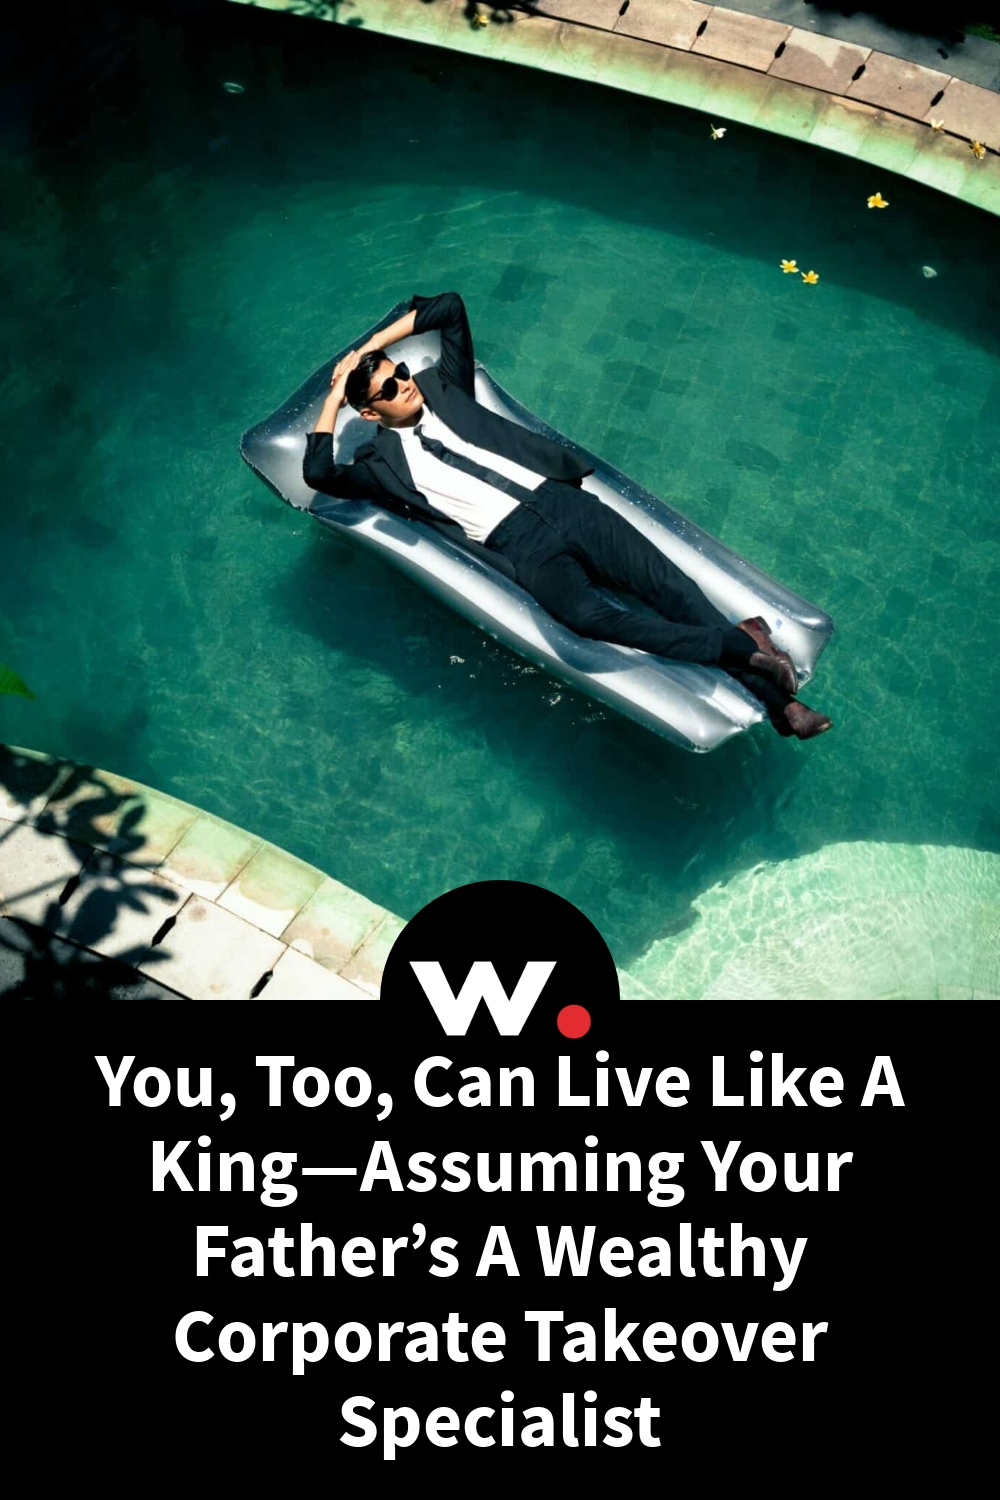 You, Too, Can Live Like A King—Assuming Your Father’s A Wealthy Corporate Takeover Specialist